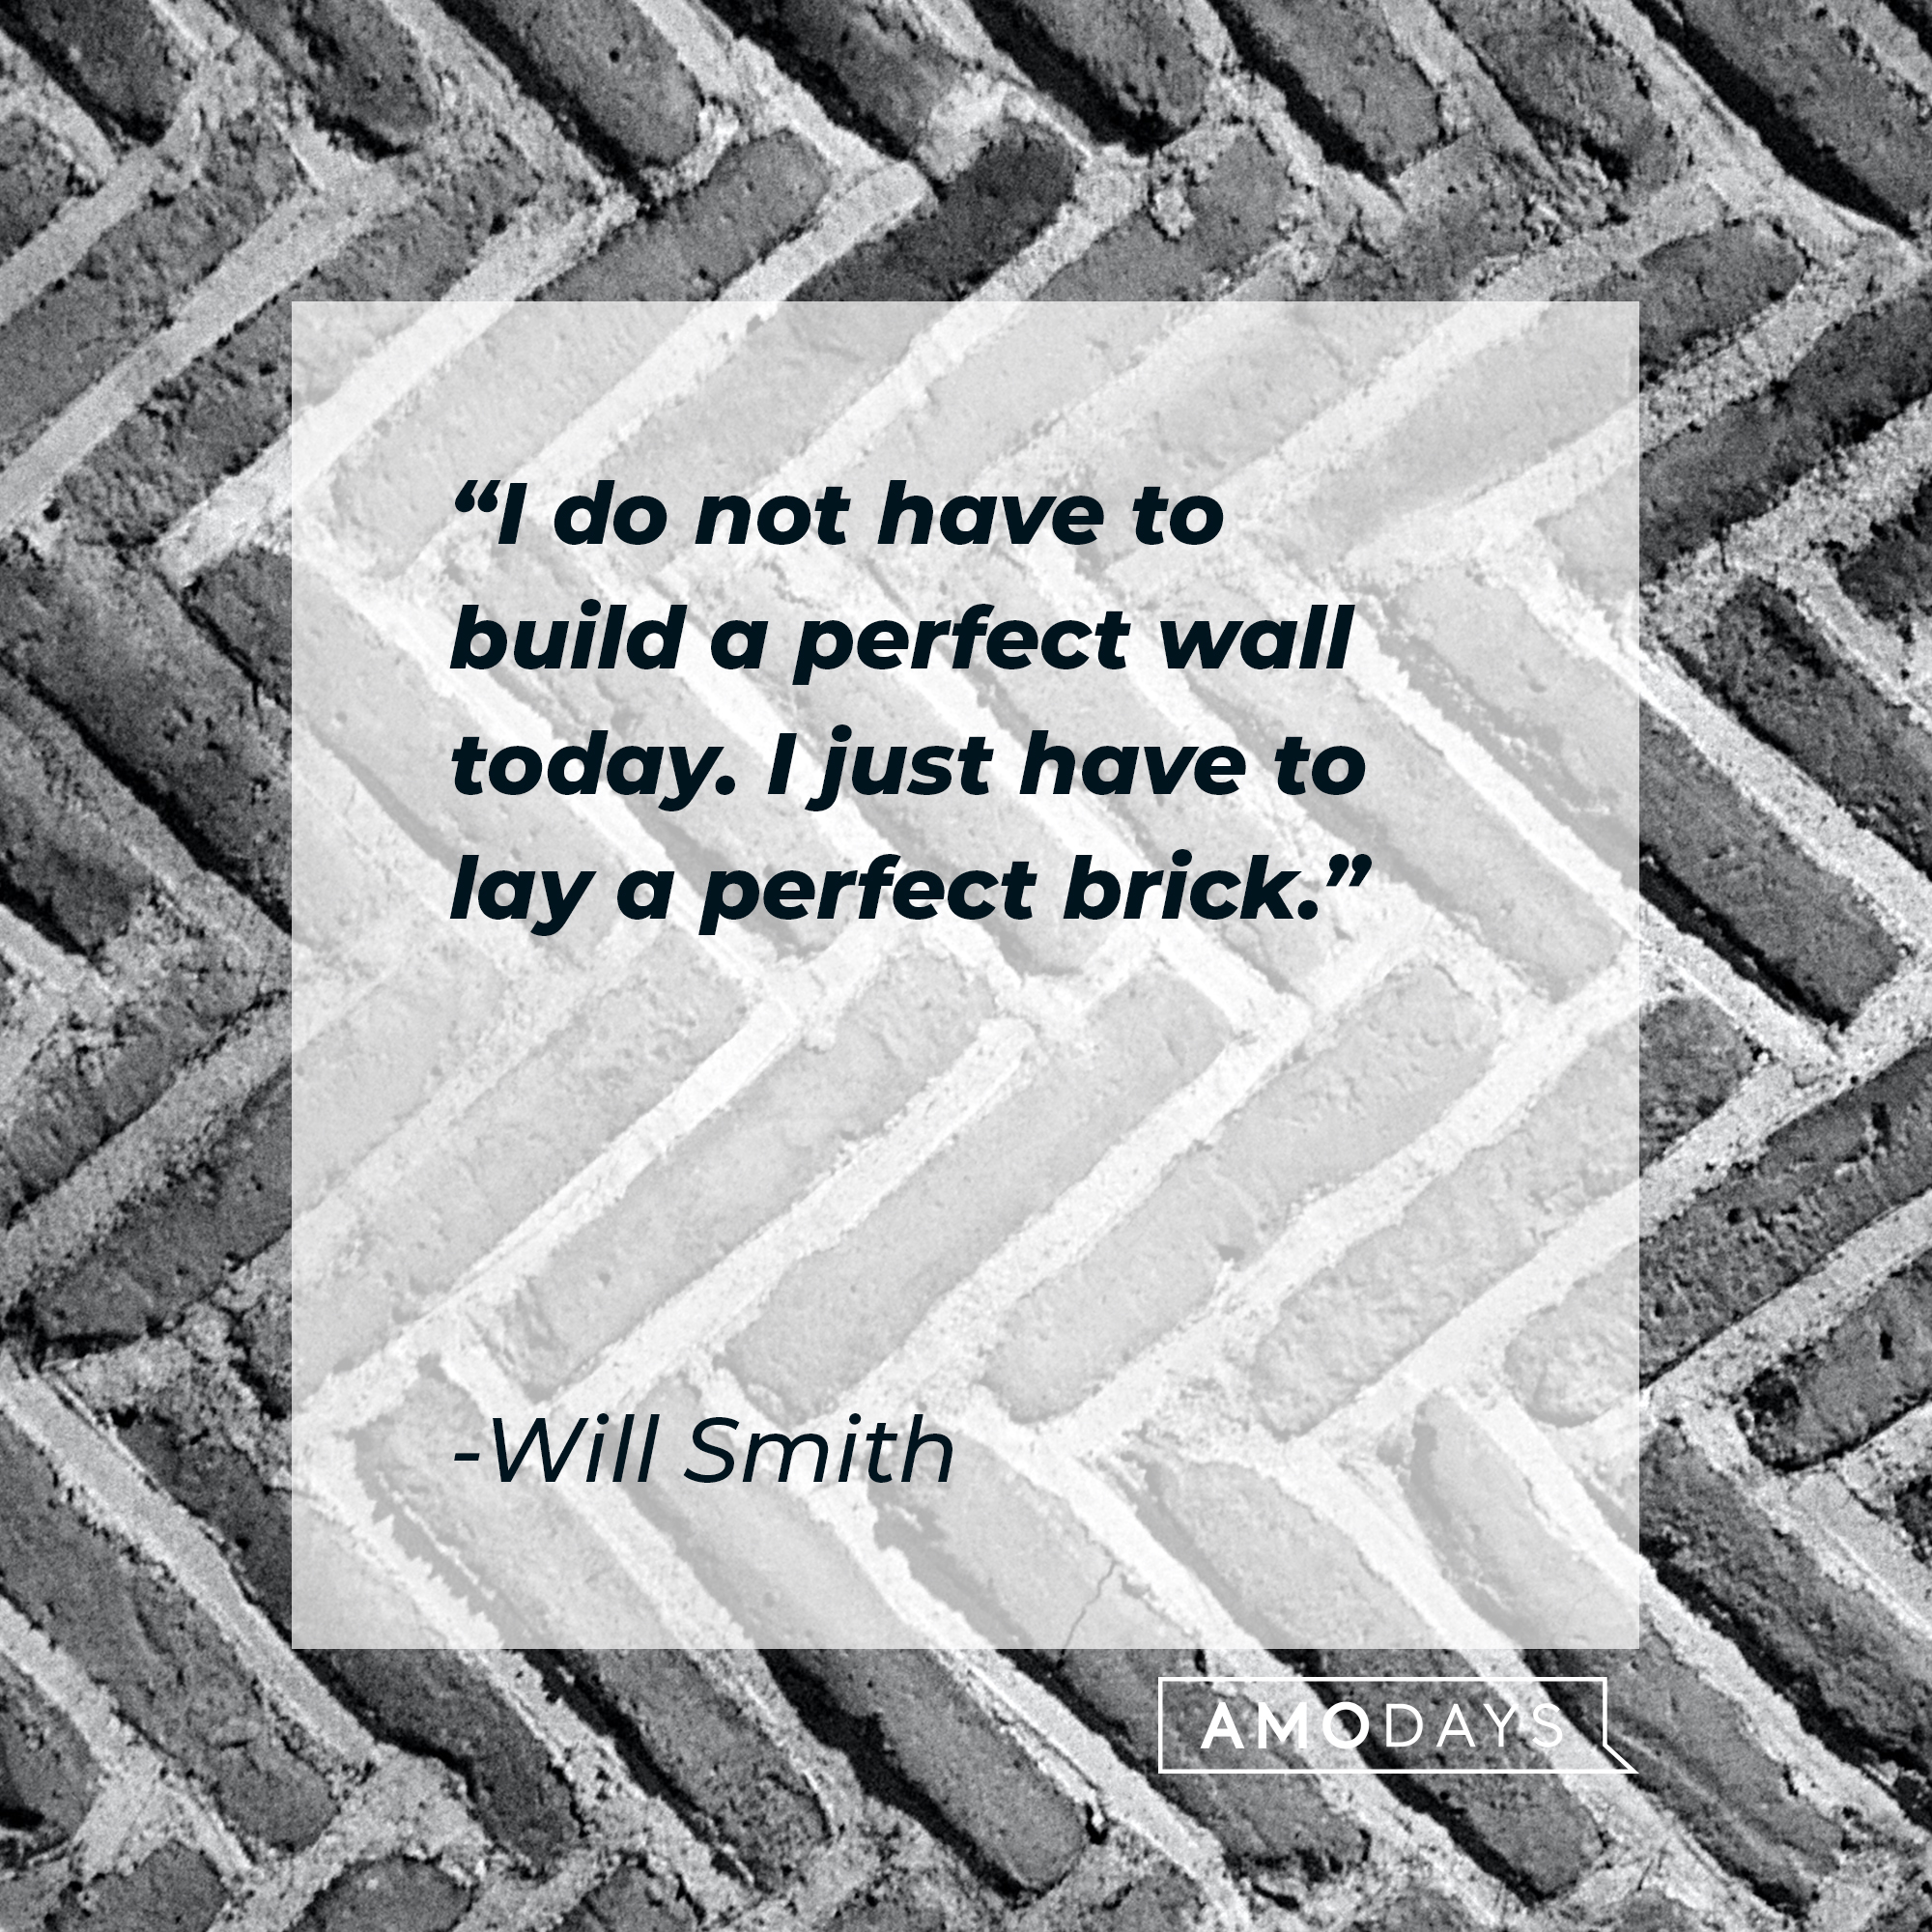 Will Smith's quote: "I do not have to build a perfect wall today. I just have to lay a perfect brick." | Source: Unsplash